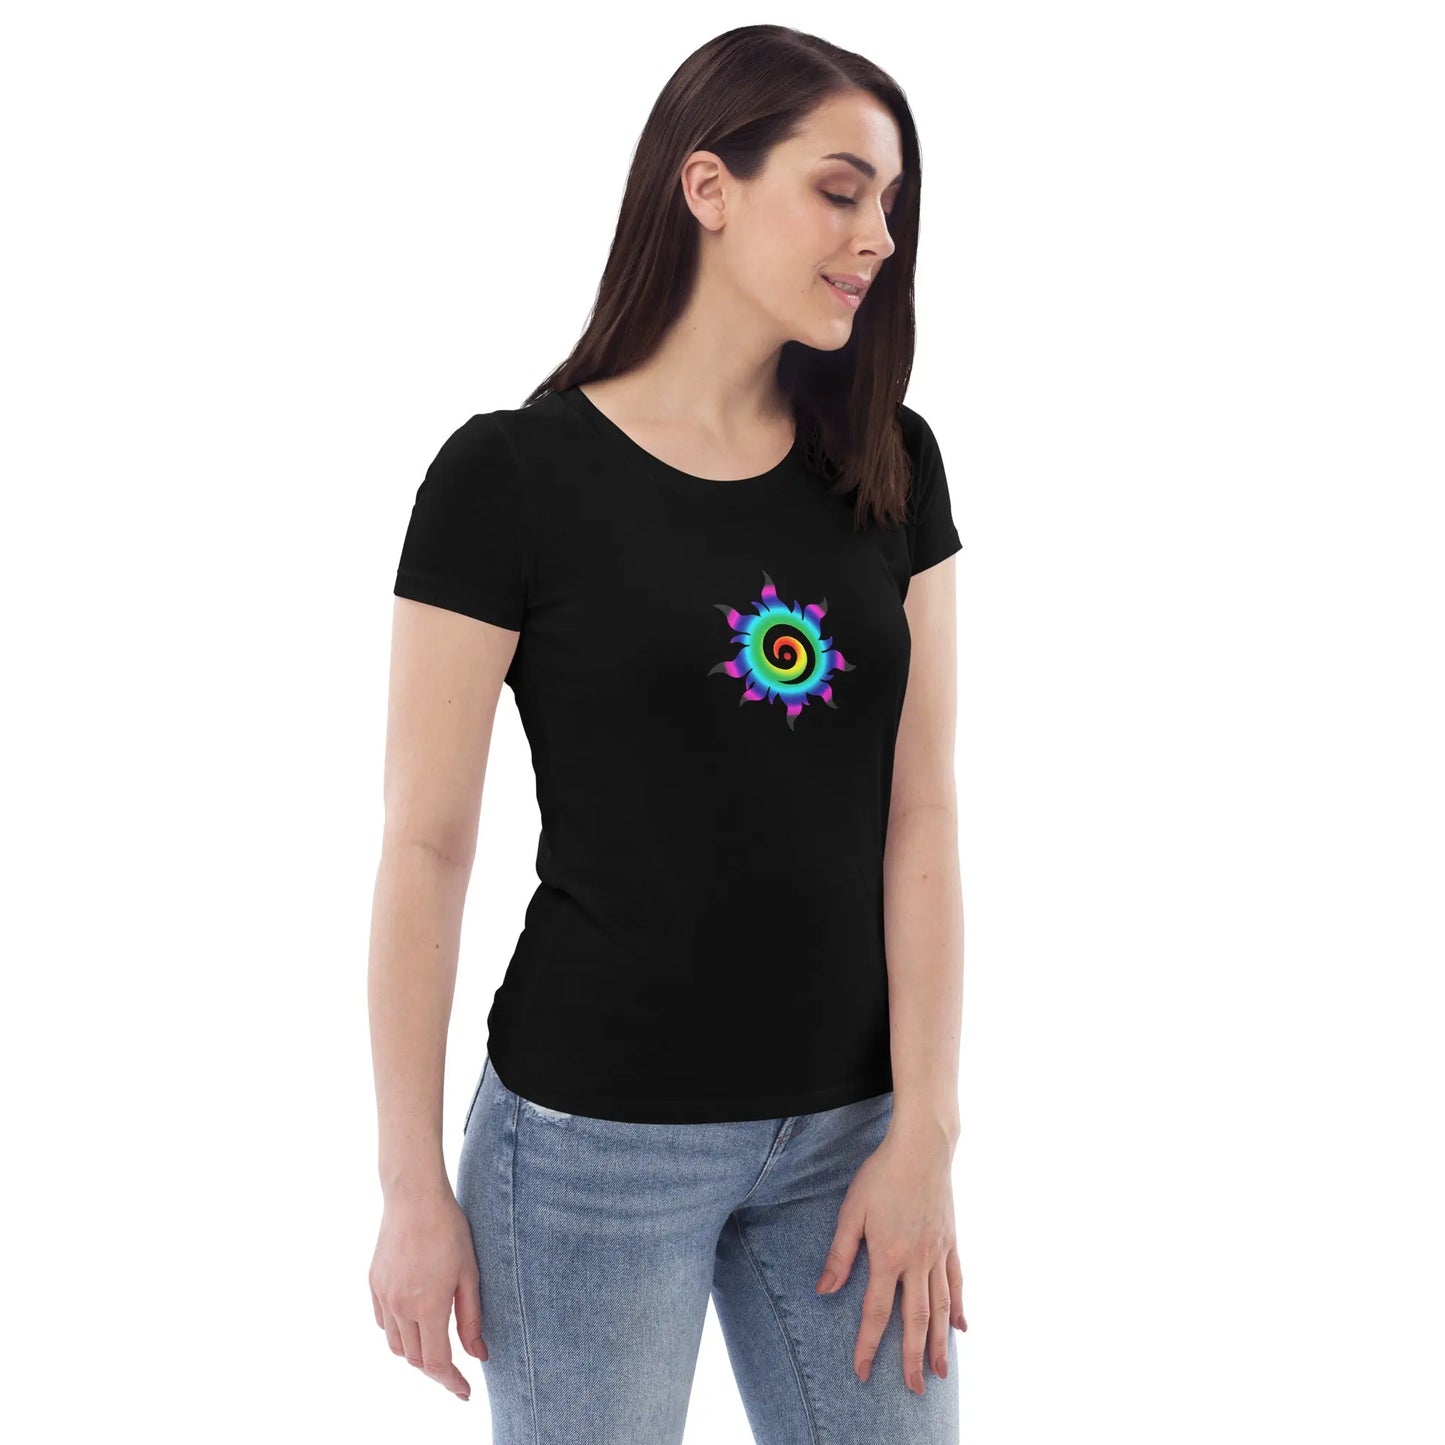 Women's fitted eco tee ActSunx - Image #5